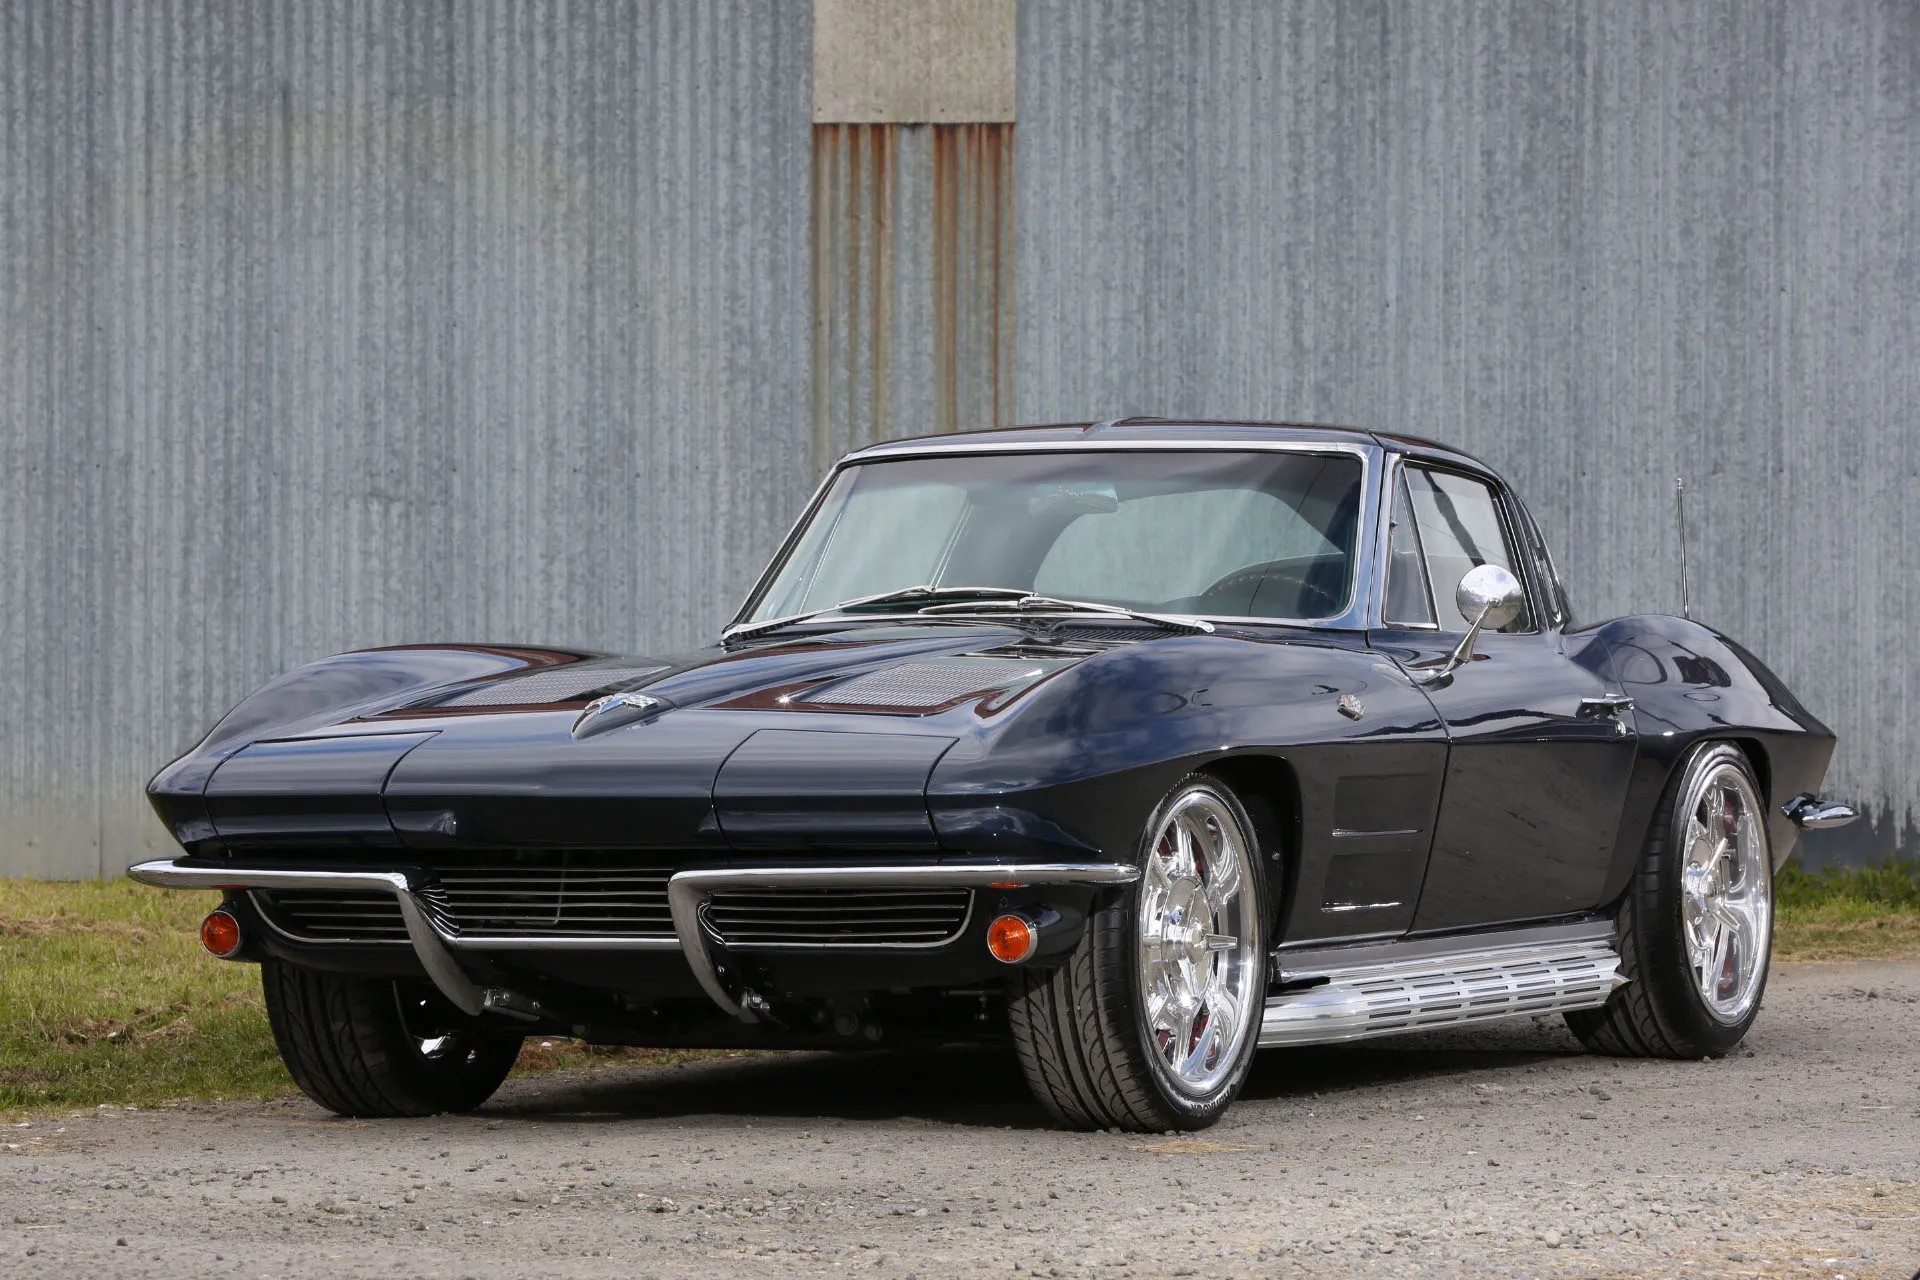 Metalworks Speed Shops Split Window Corvette Gets The Most Out Of An